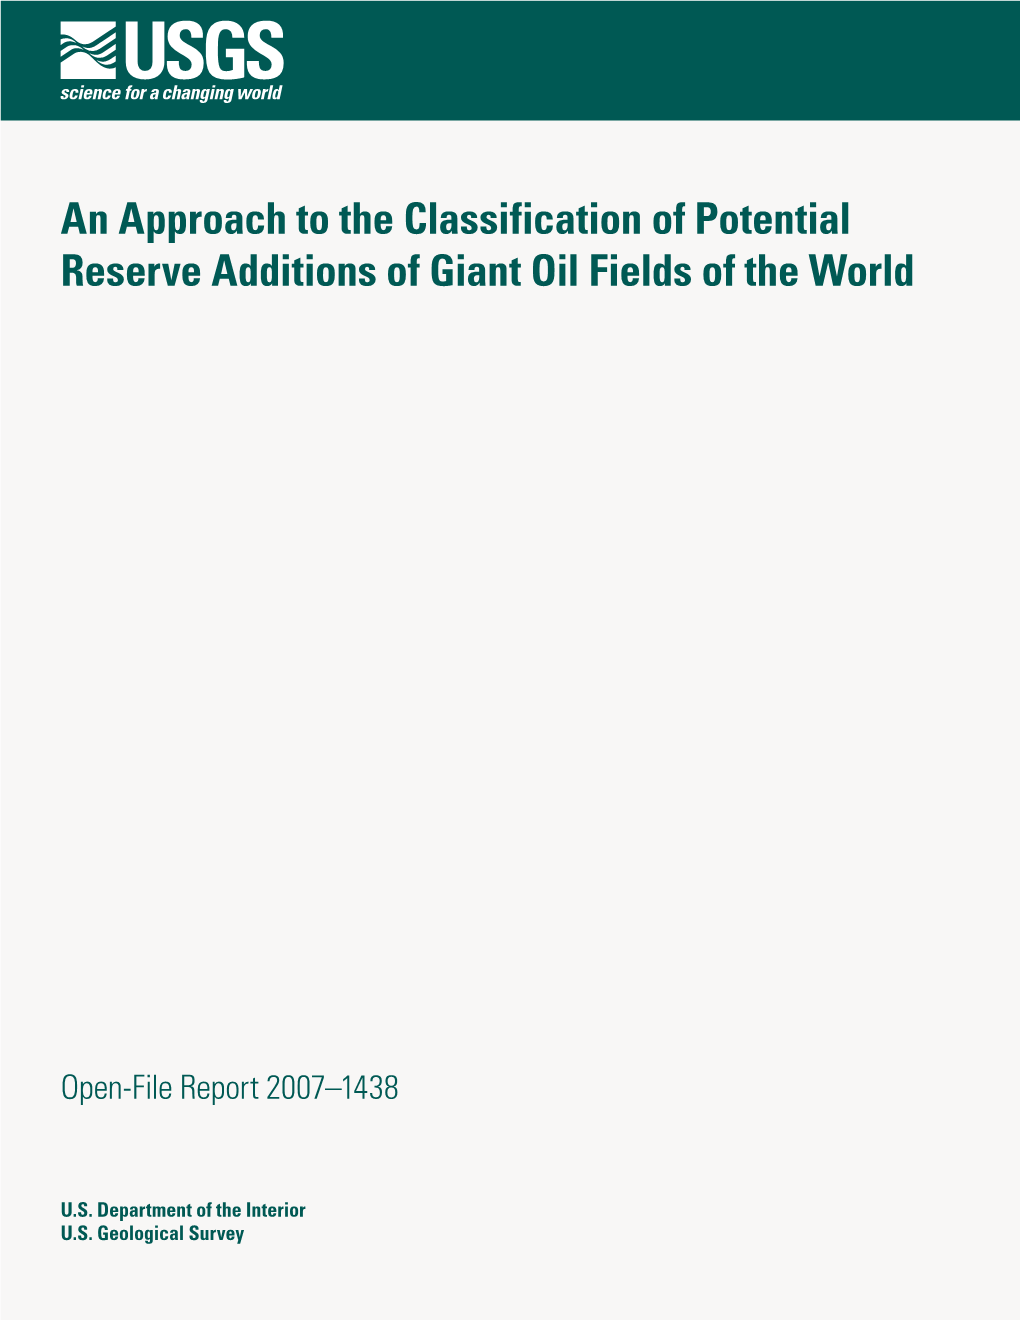 An Approach to the Classification of Potential Reserve Additions of Giant Oil Fields of the World